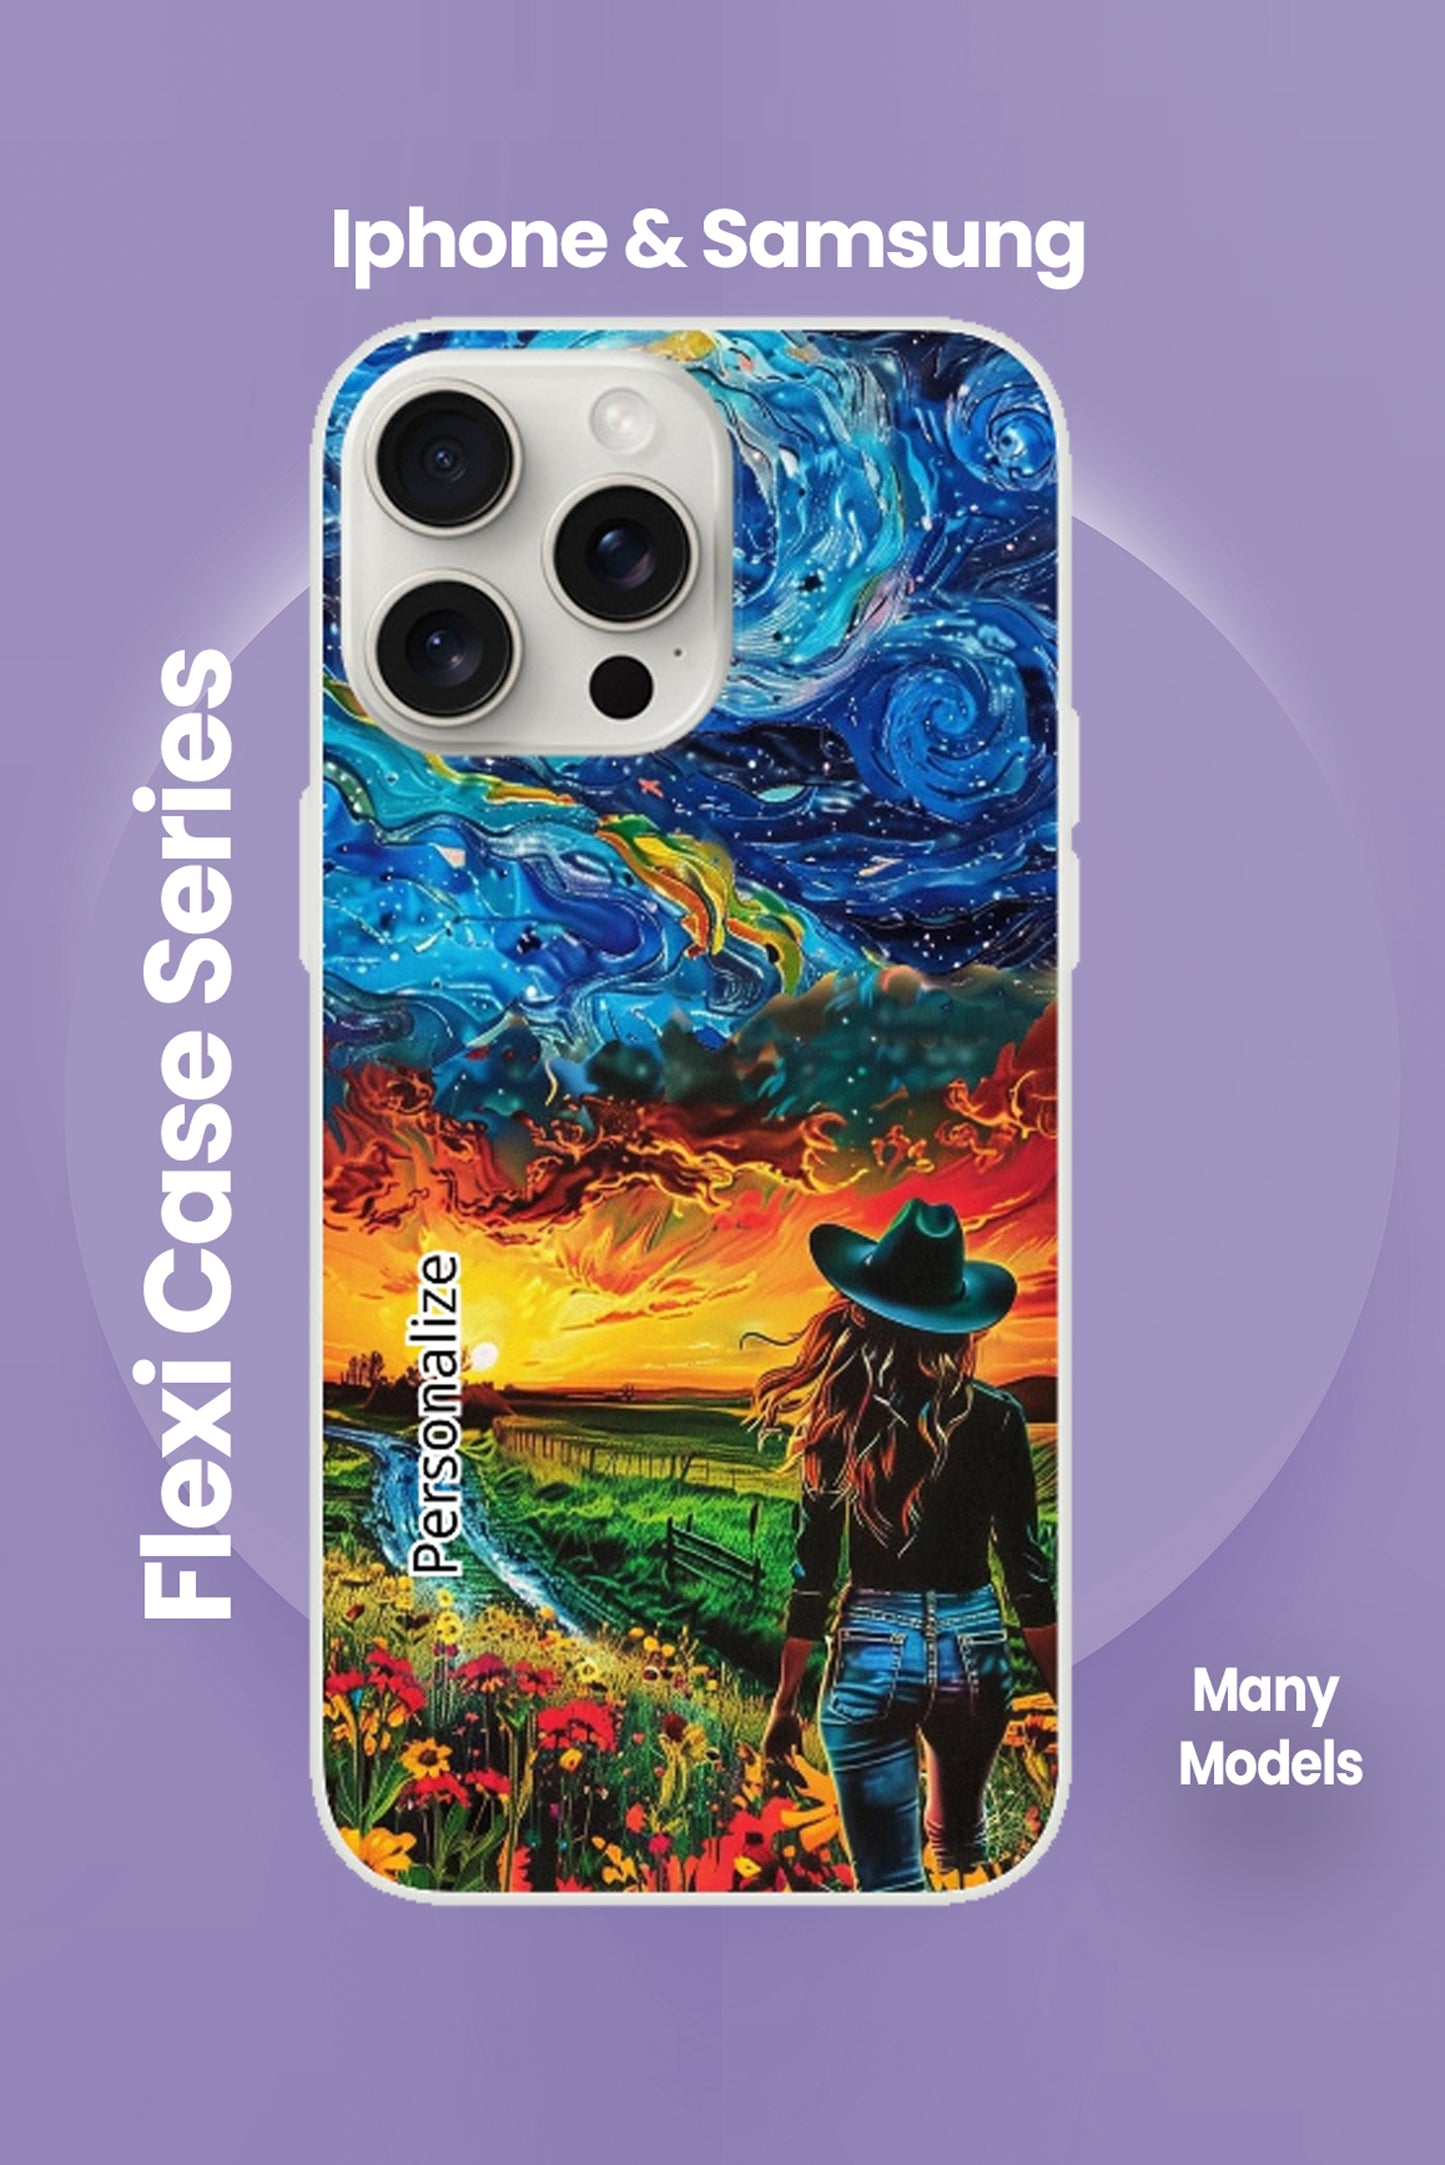 Flexi Cowgirl in Field Phone Case - Iphone and Samsung Many Models